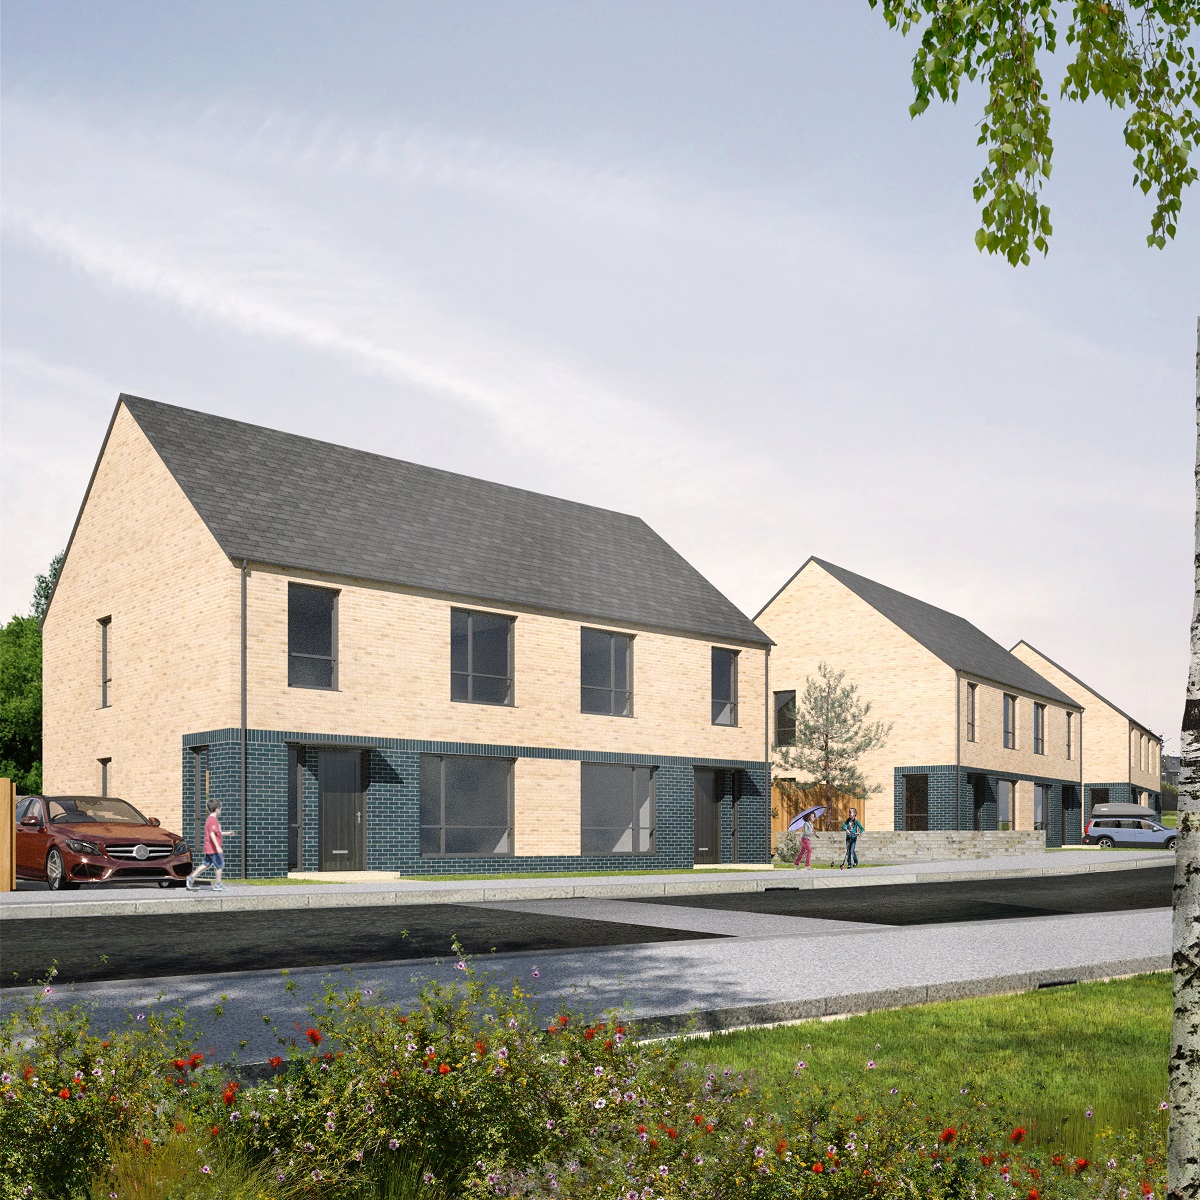 Work starts on 46 Cube homes for social rent in Dumbarton